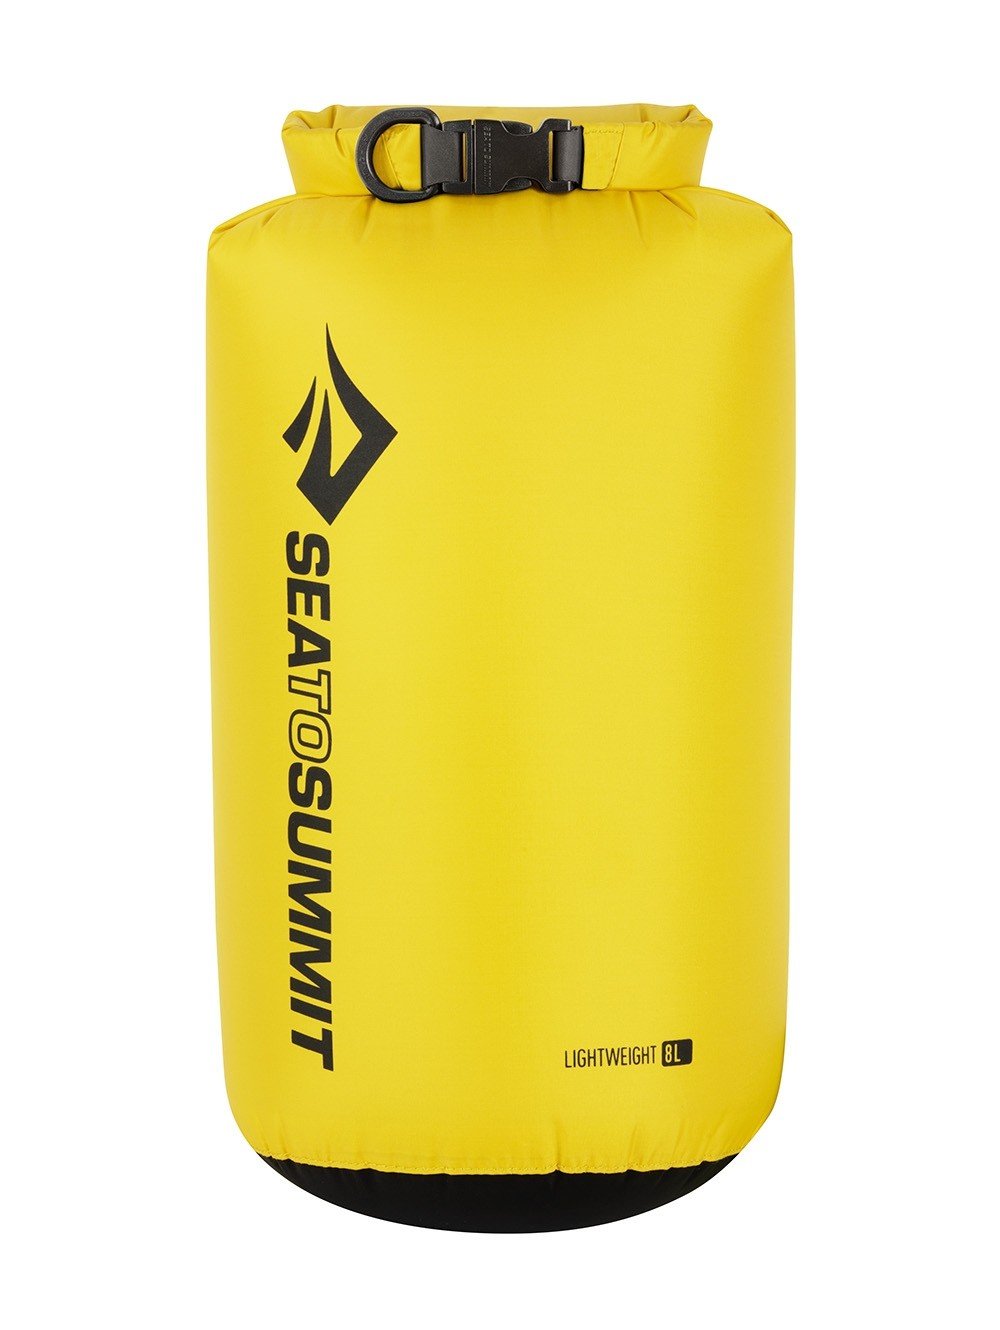 Sea To Summit Lightweight 70D 8 Litres Dry Sack Bags, Packs and Cases Sea To Summit Yellow Tactical Gear Supplier Tactical Distributors Australia